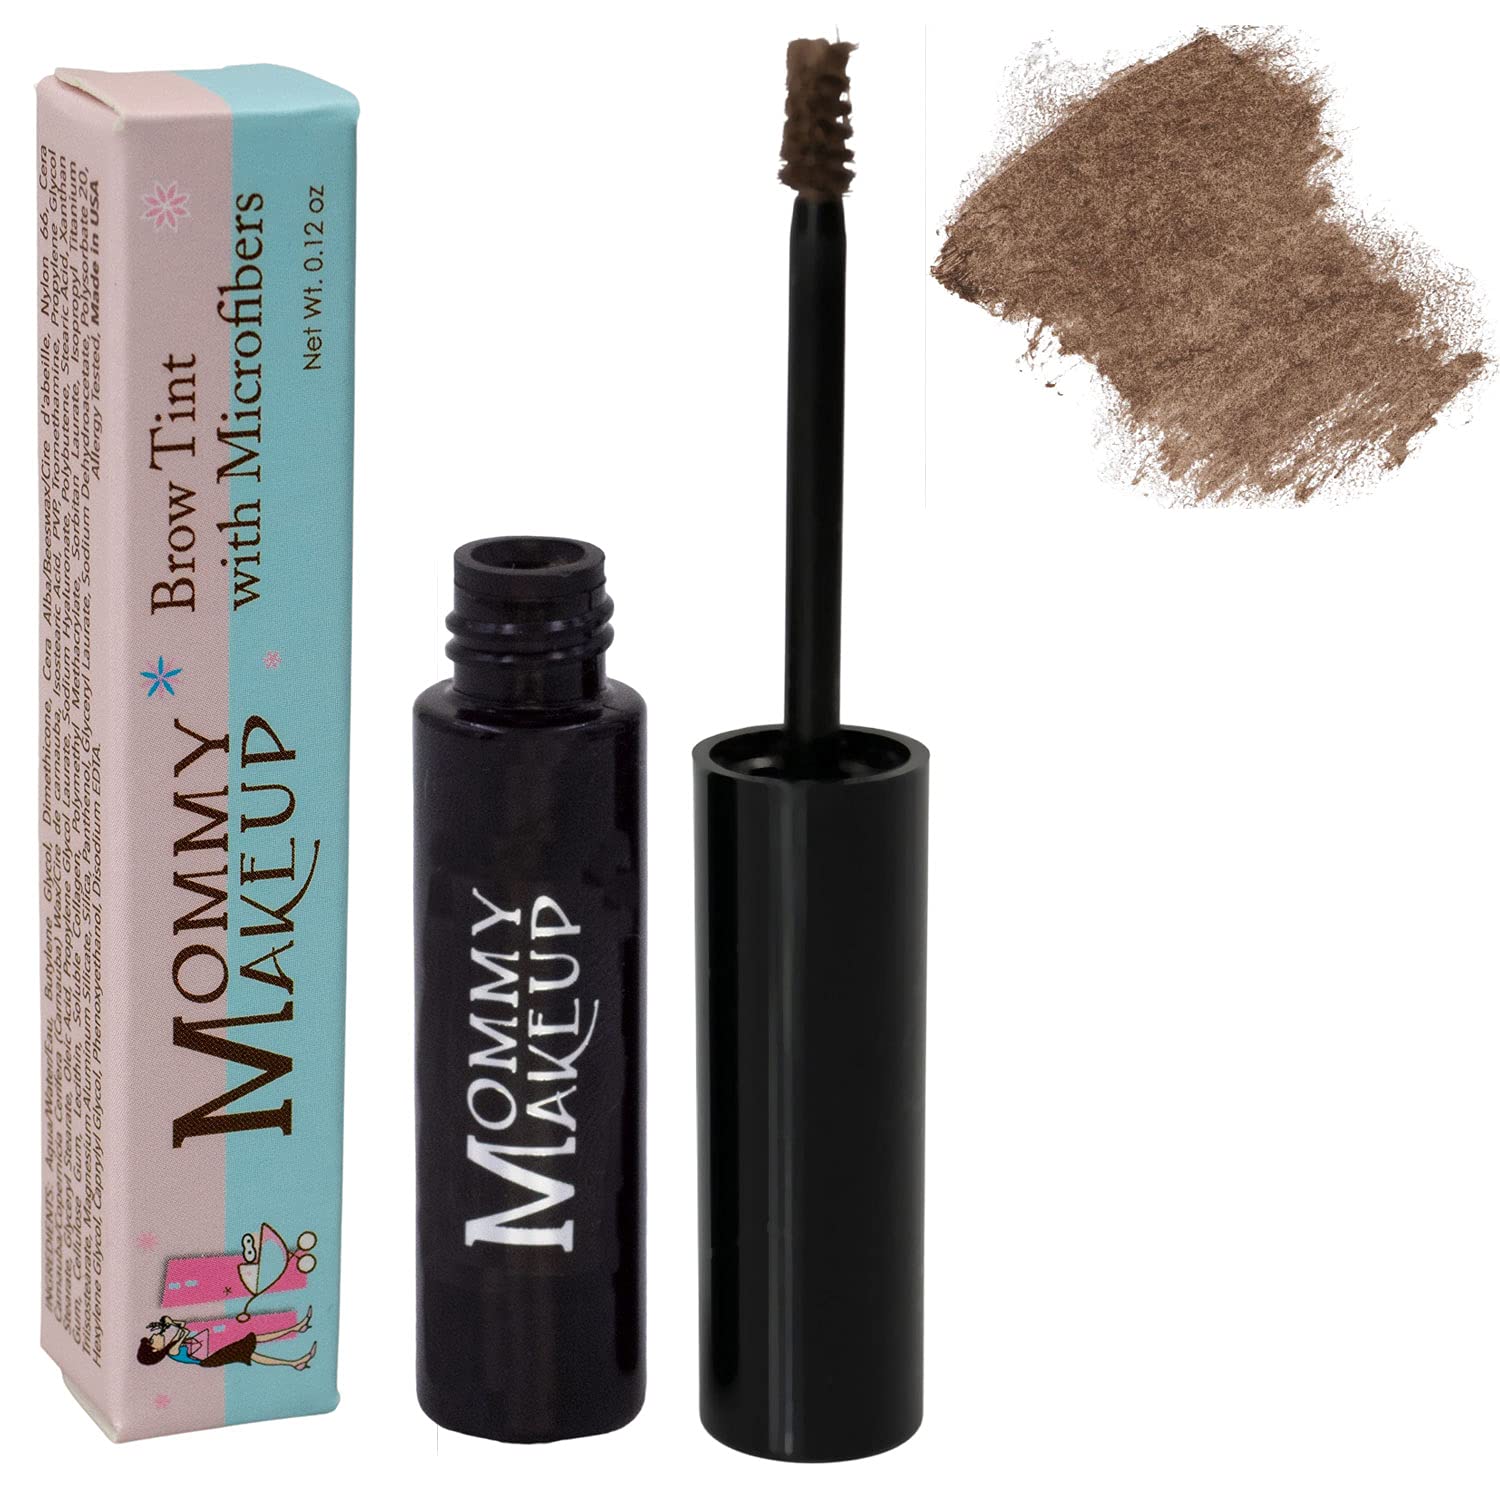 Mommy Makeup Brow Tint with Microfibers. Eyebrow Makeup - Long Lasting Eyebrow Gel. Clump-Free, Paraben-free, Talc-free, Made in USA. PETA Certified No Animal Testing - Fawn